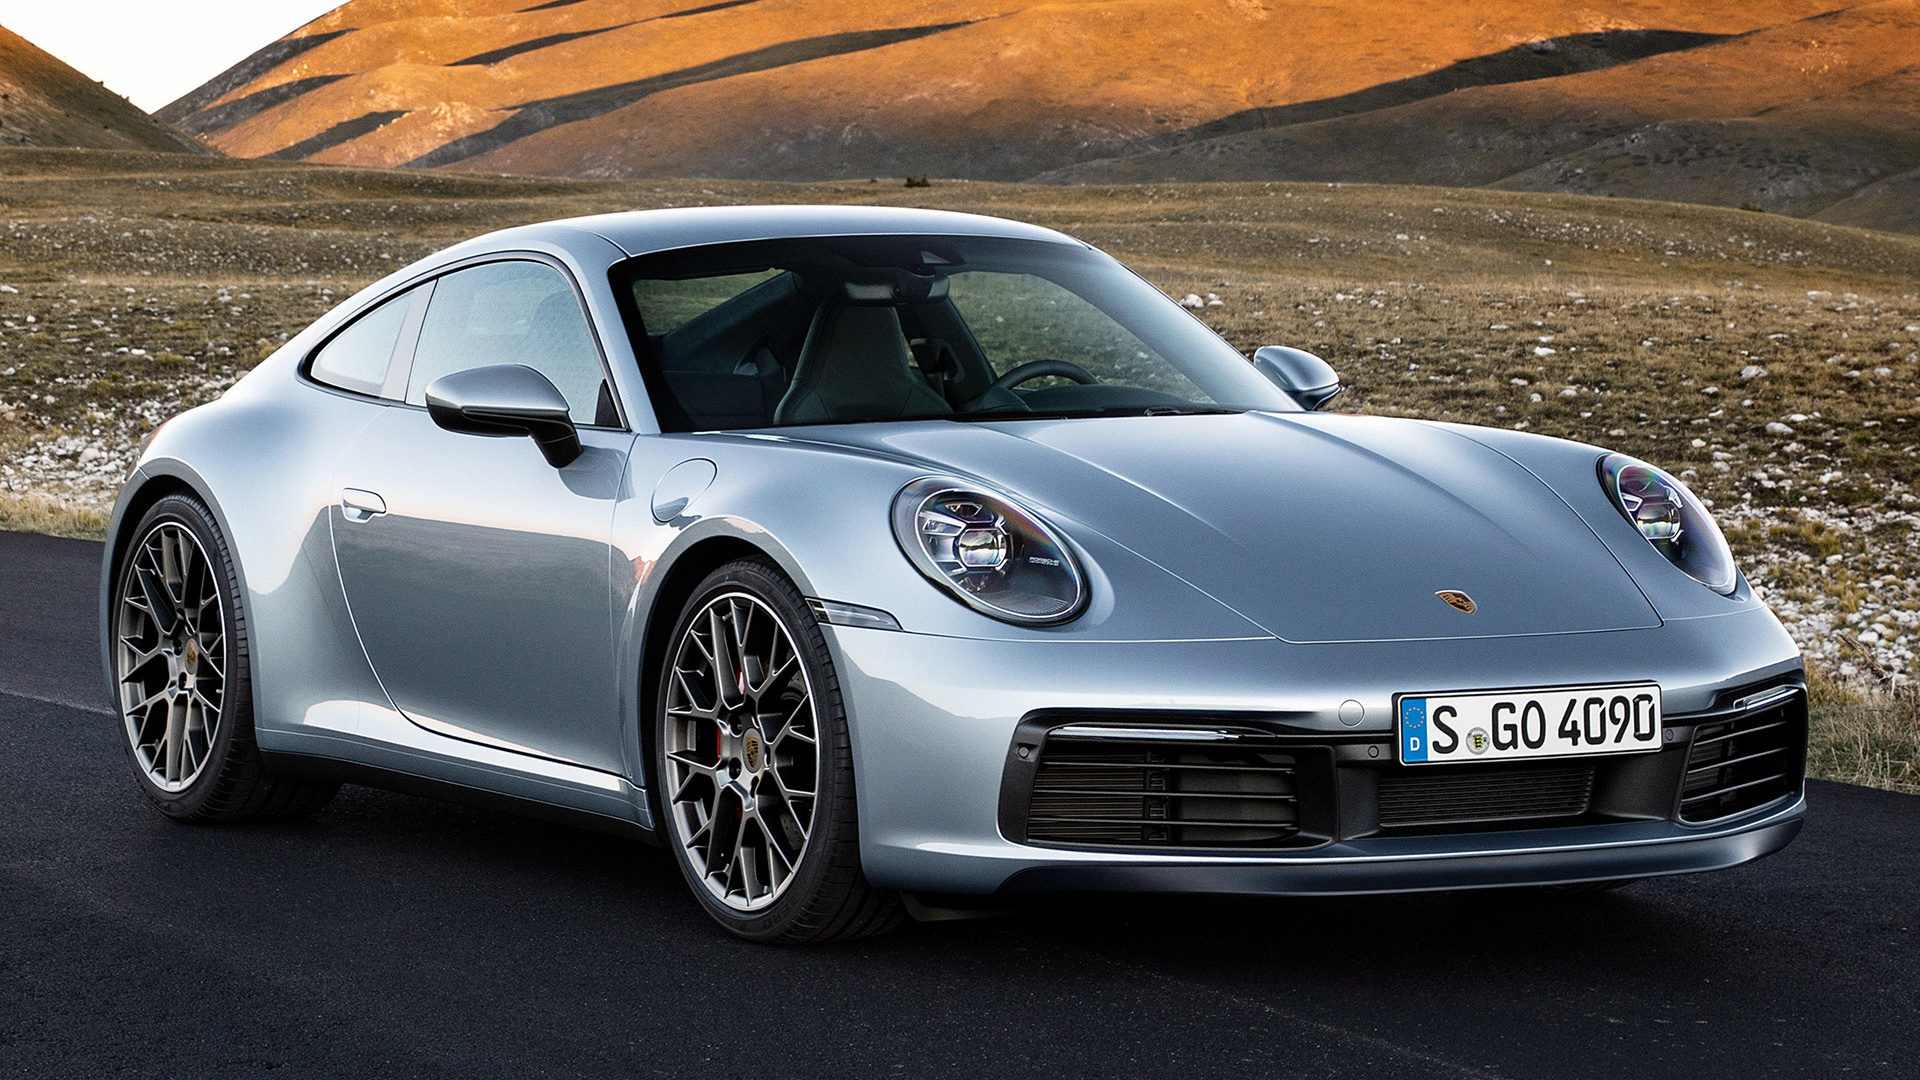 2019 Porsche 911 Carrera S Wallpapers and HD Images